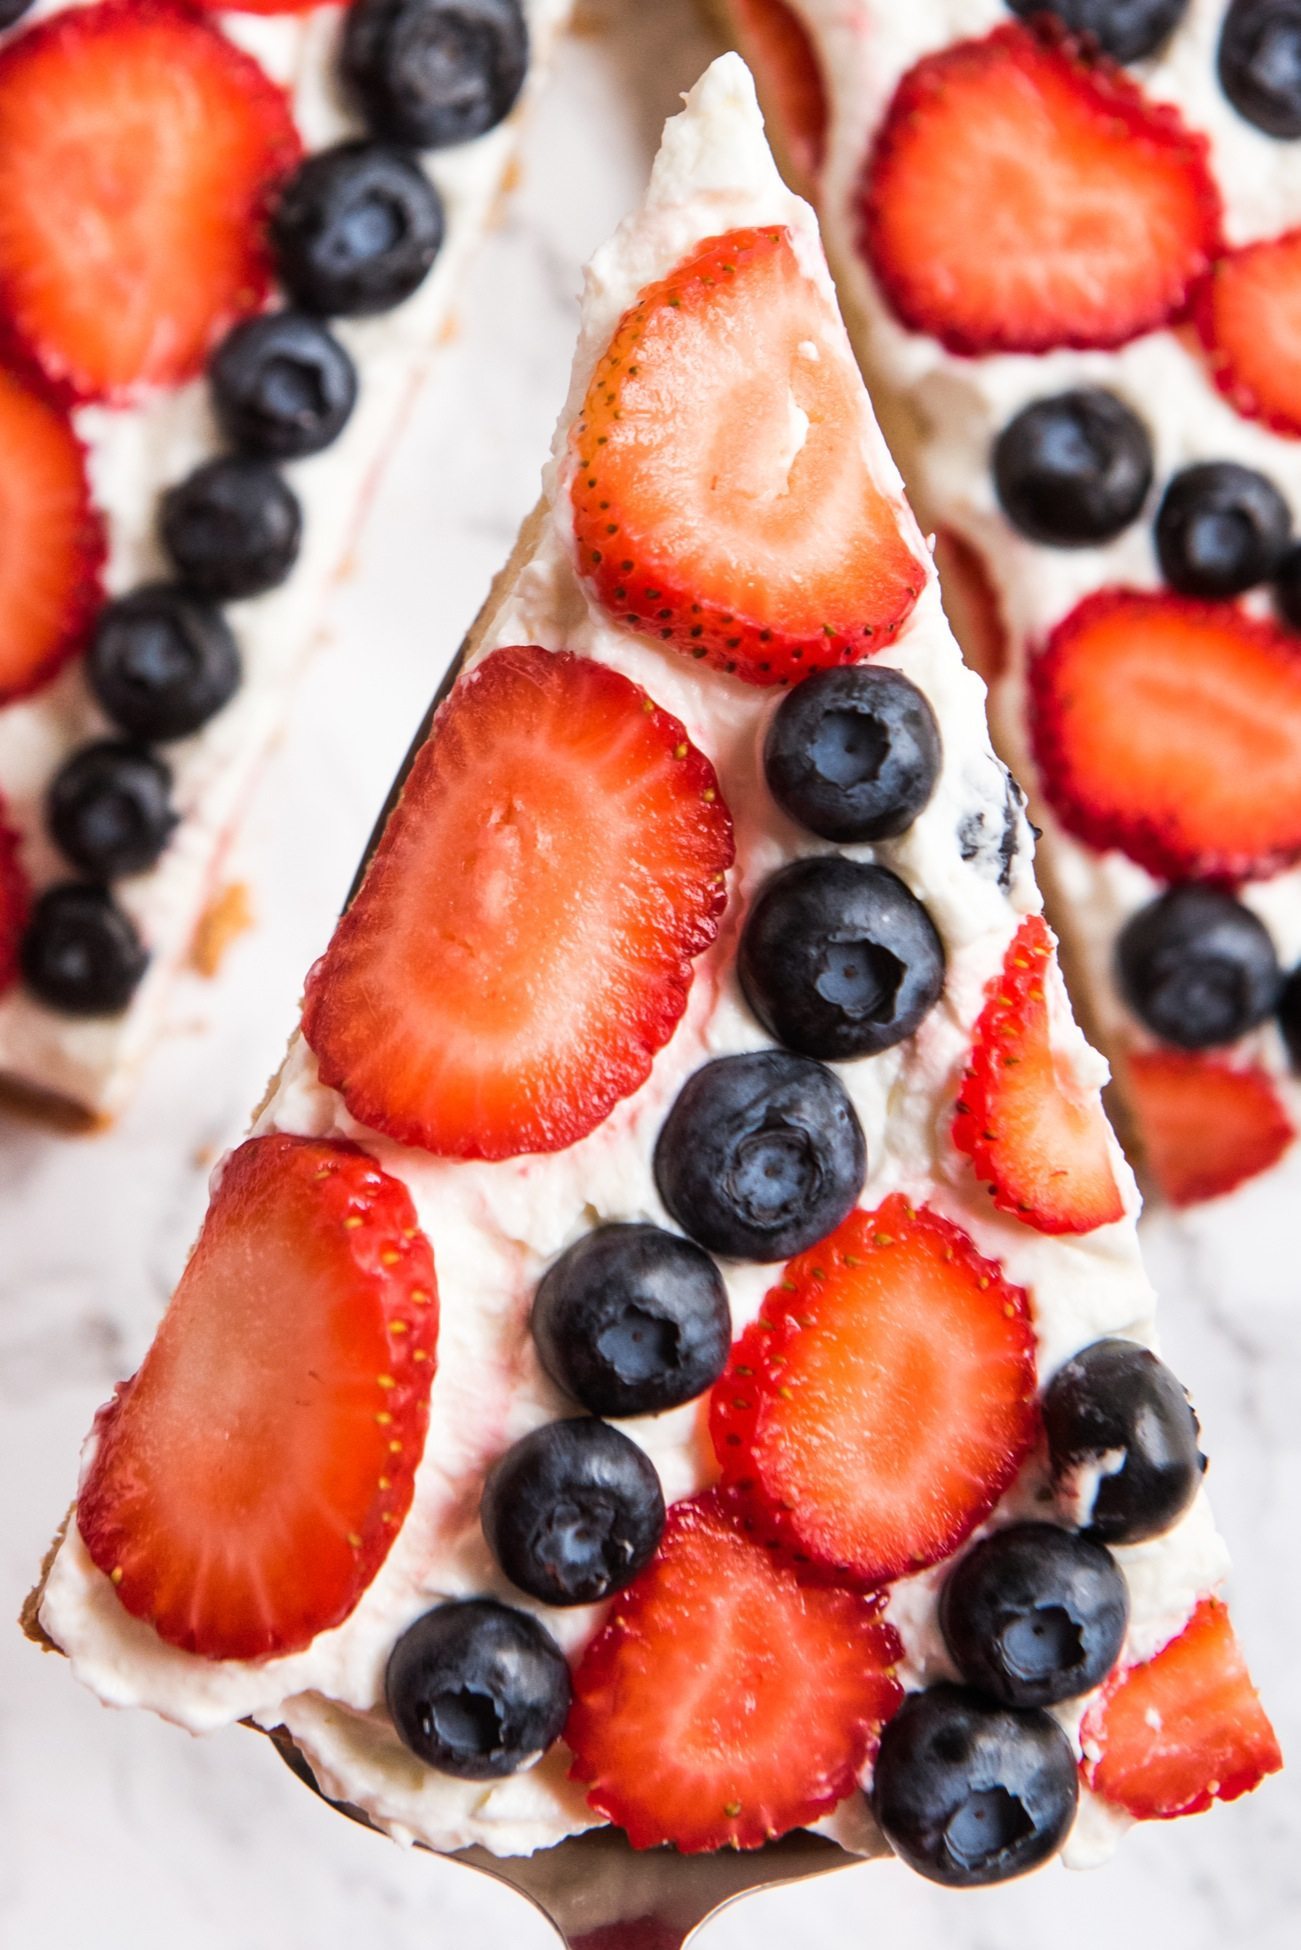 4th of July Desserts: Red, White and Blue Berry Fruit Pizza | 4th of July recipes, entertaining tips, party ideas, 4th of July ideas and more from @cydconverse